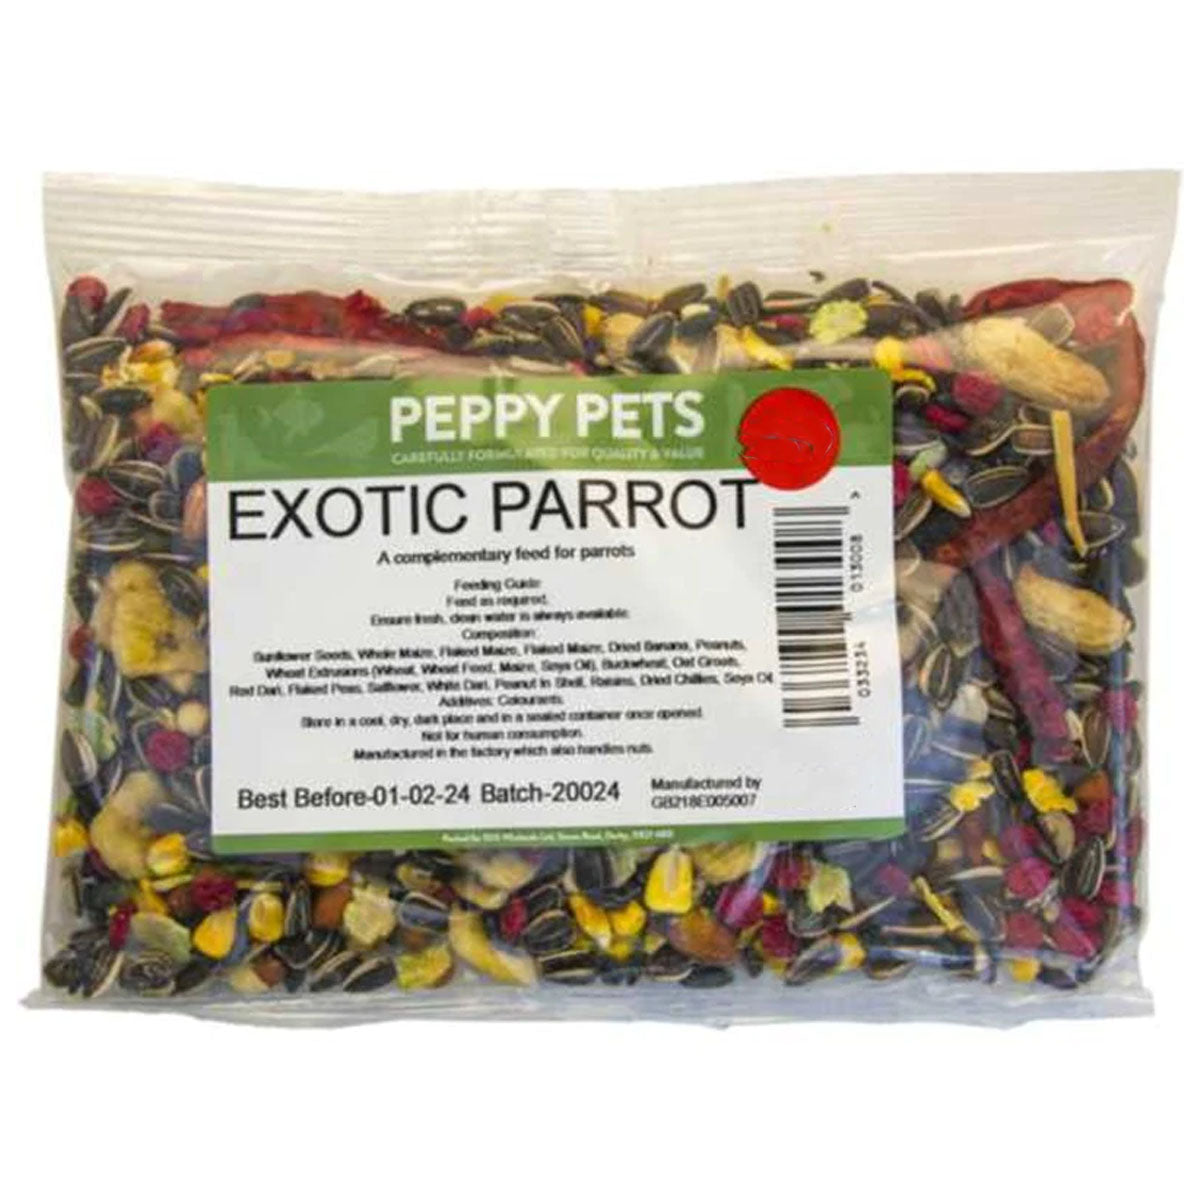 Peppy Pets - Exotic Parrot Food - 325g.